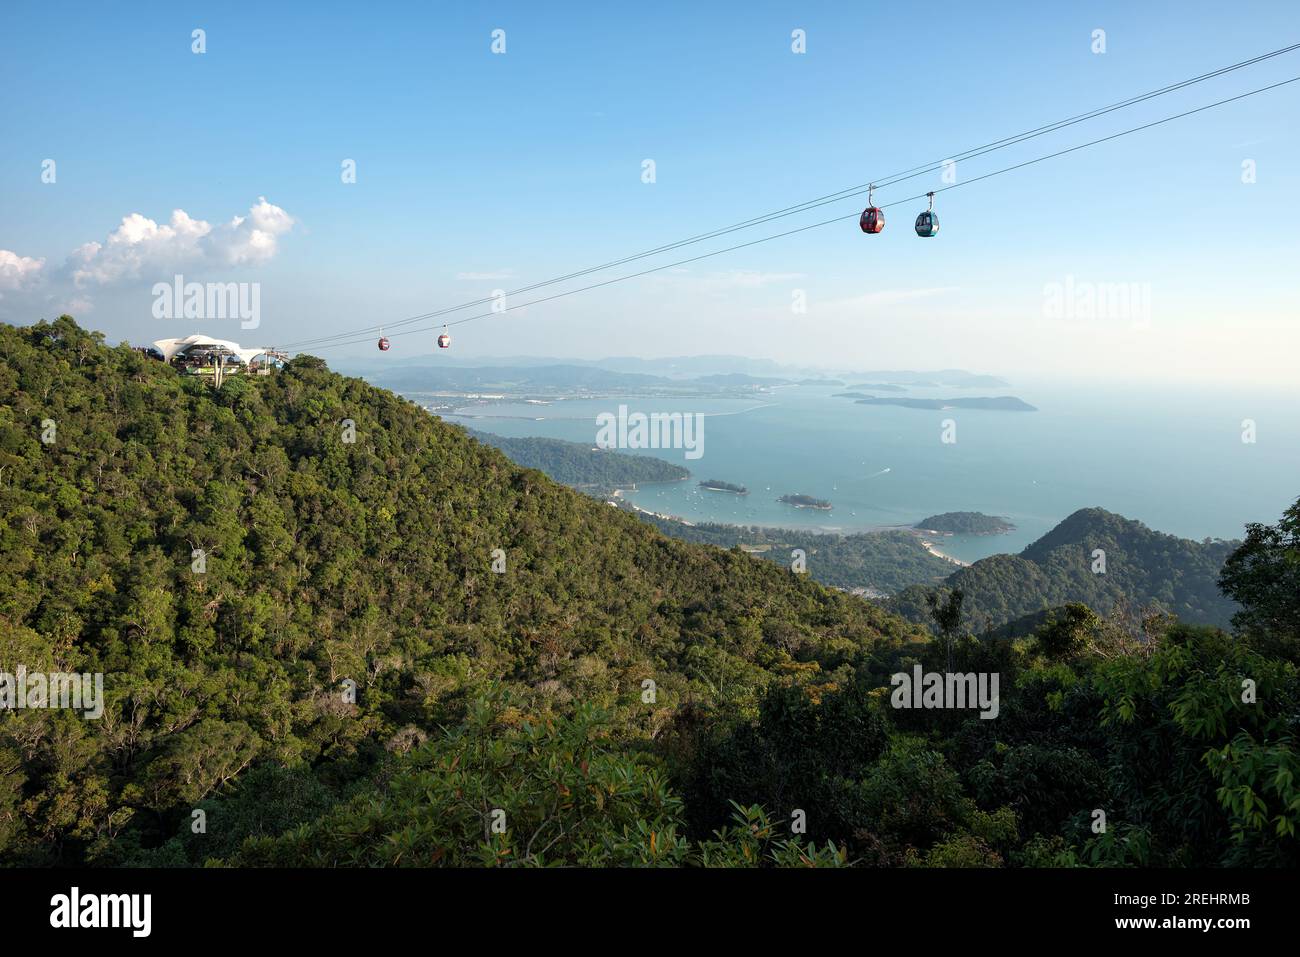 The Langkawi Cable Car, also known as Langkawi SkyCab transporting passengers to top Machincang mountain and foothill, Langkawi Island, Malaysia - The Stock Photo